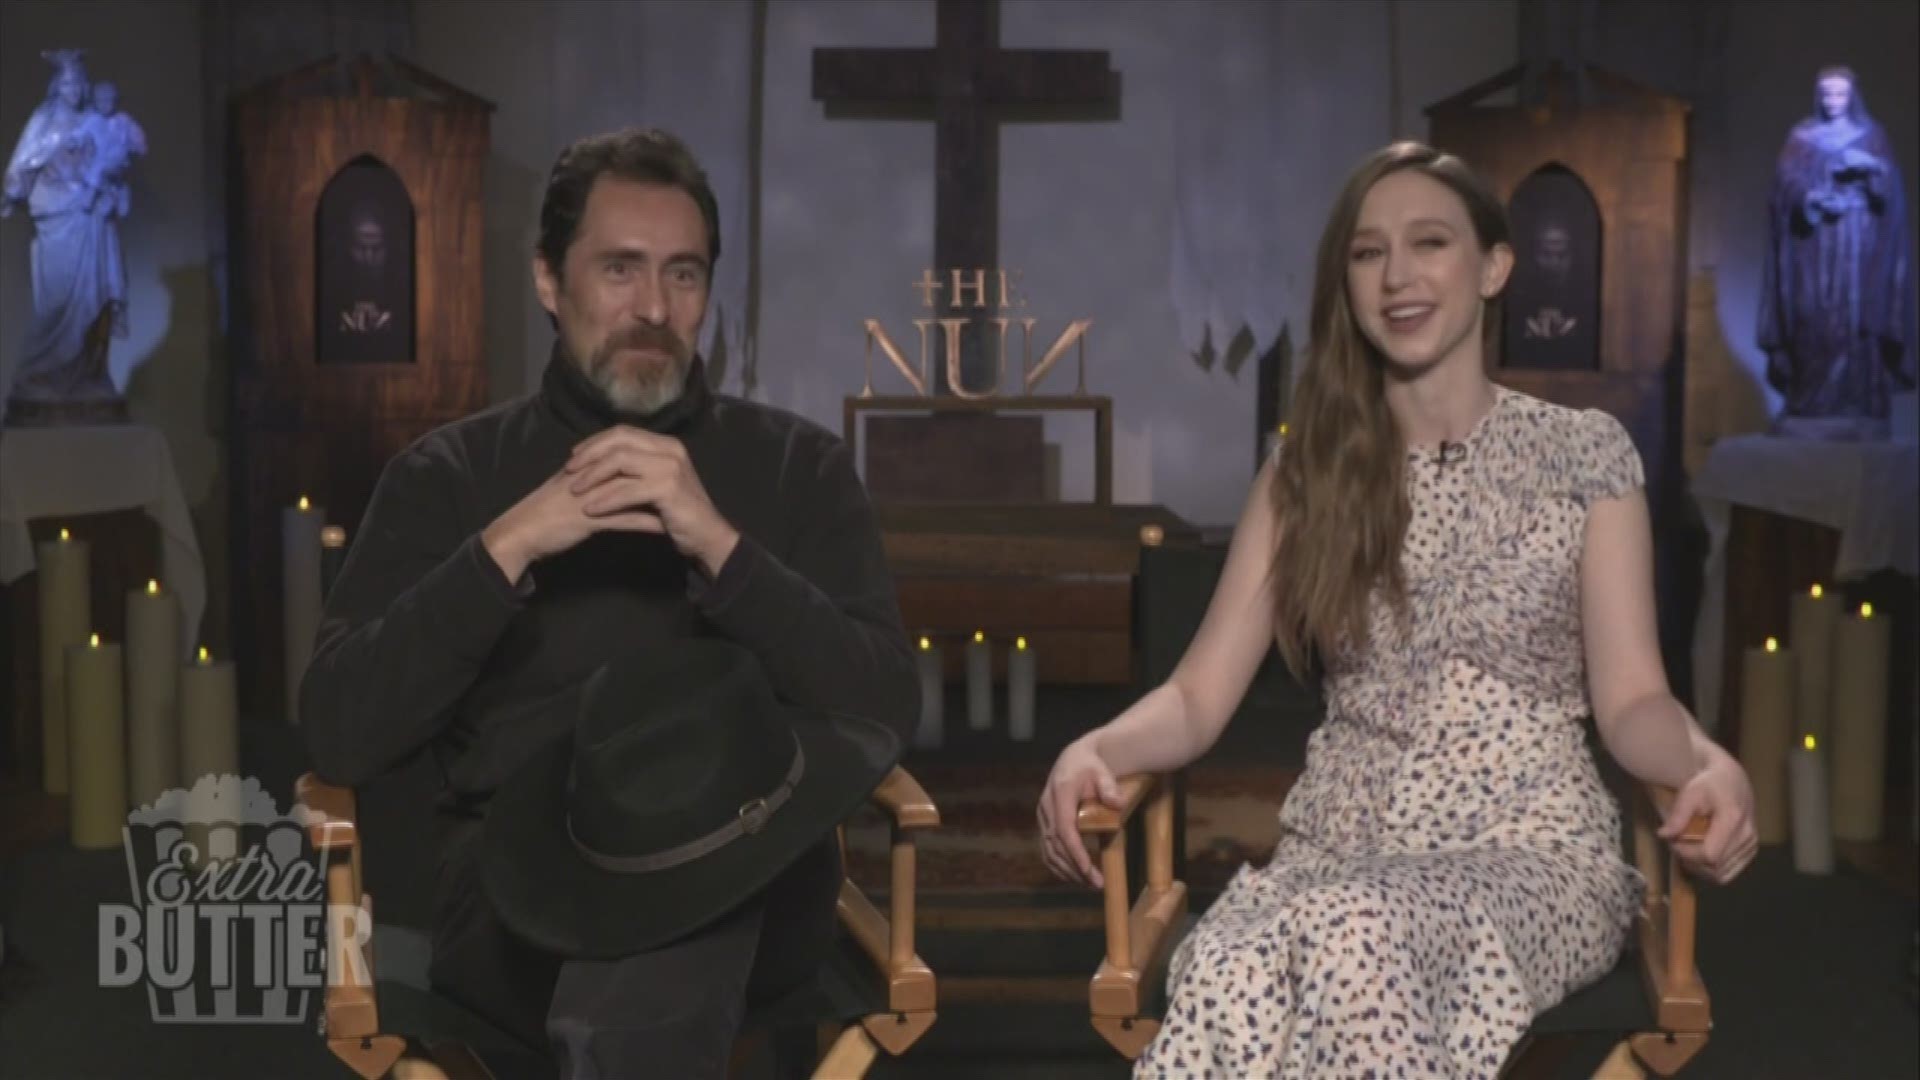 Mark S. Allen talks with the stars of 'The Nun,' Taissa Farmiga and Demián Bichir. Debra Messing talks Searching and the Extra Butter Crew discusses Crazy Rich Asians.